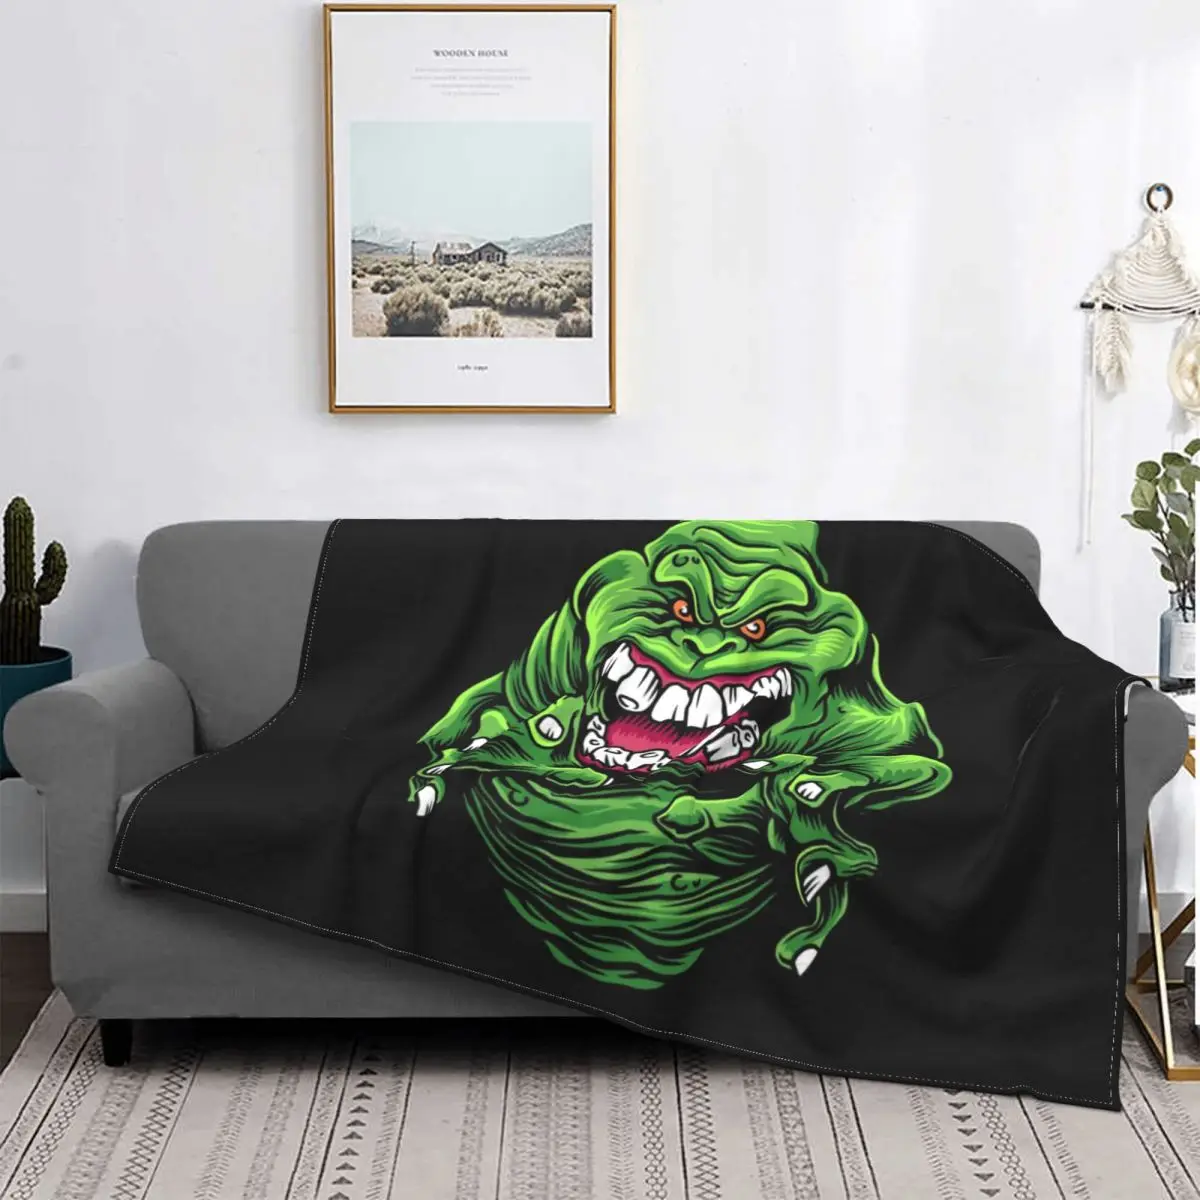 

Blankets Breathable Soft Flannel Summer Supernatural Comedy Film Throw Blanket for Couch Car Bedroom Ghostbusters Busters